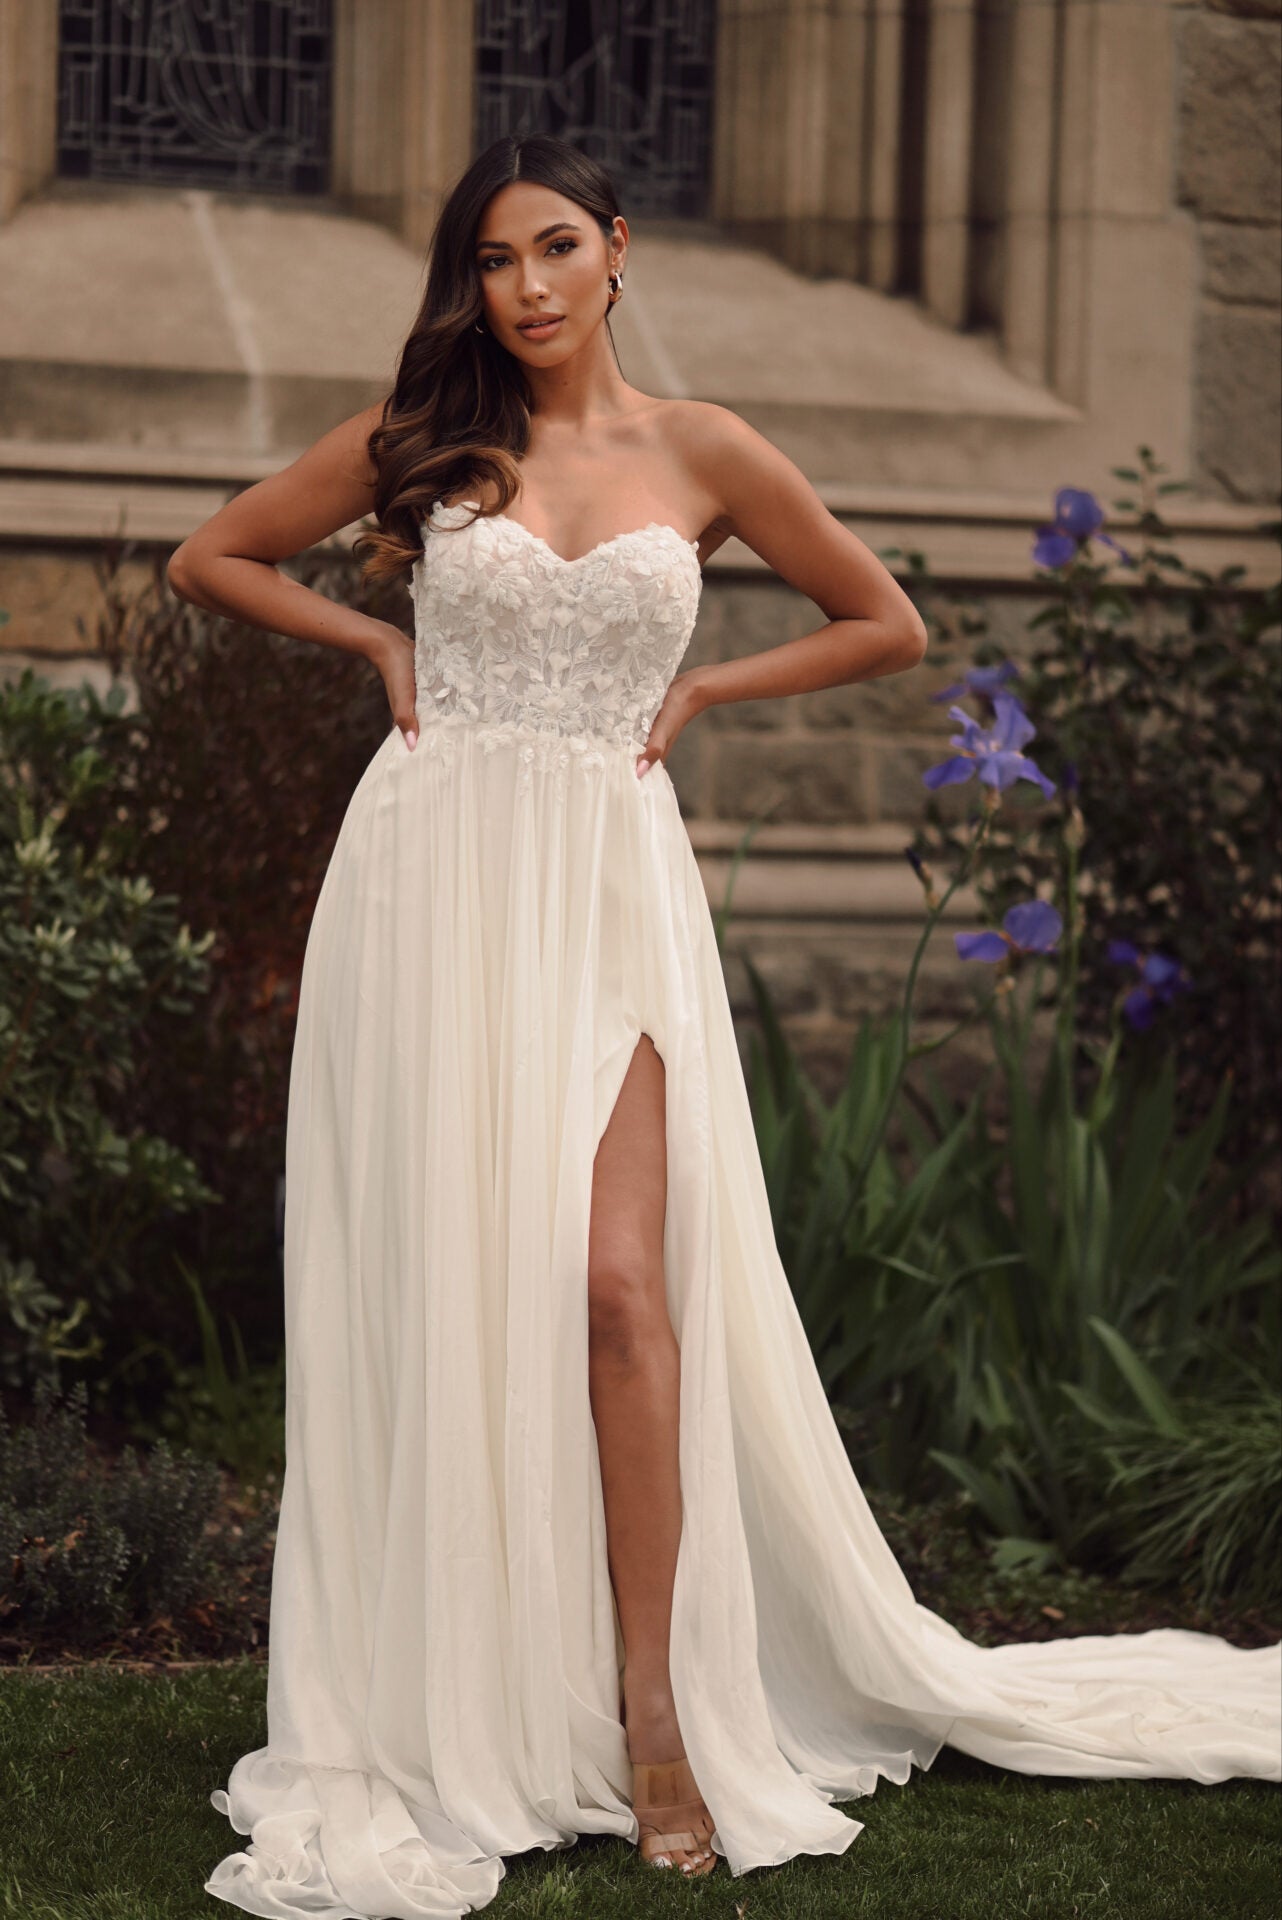 Strapless A-line Wedding Dress With 3D Florals by Martina Liana